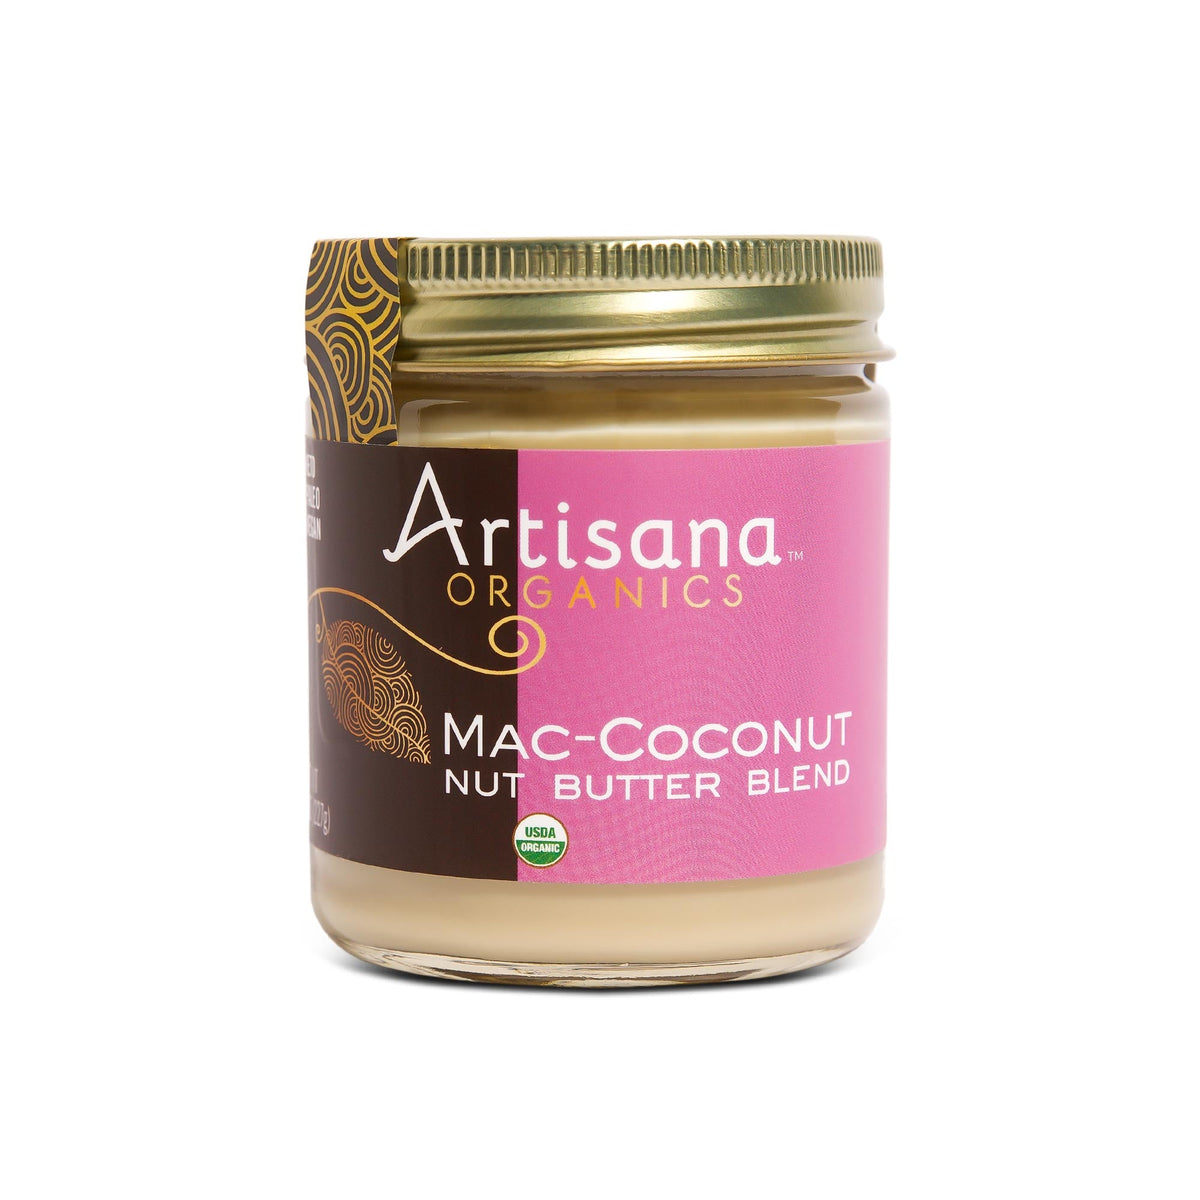 Macadamia Coconut Nut Butter Blend